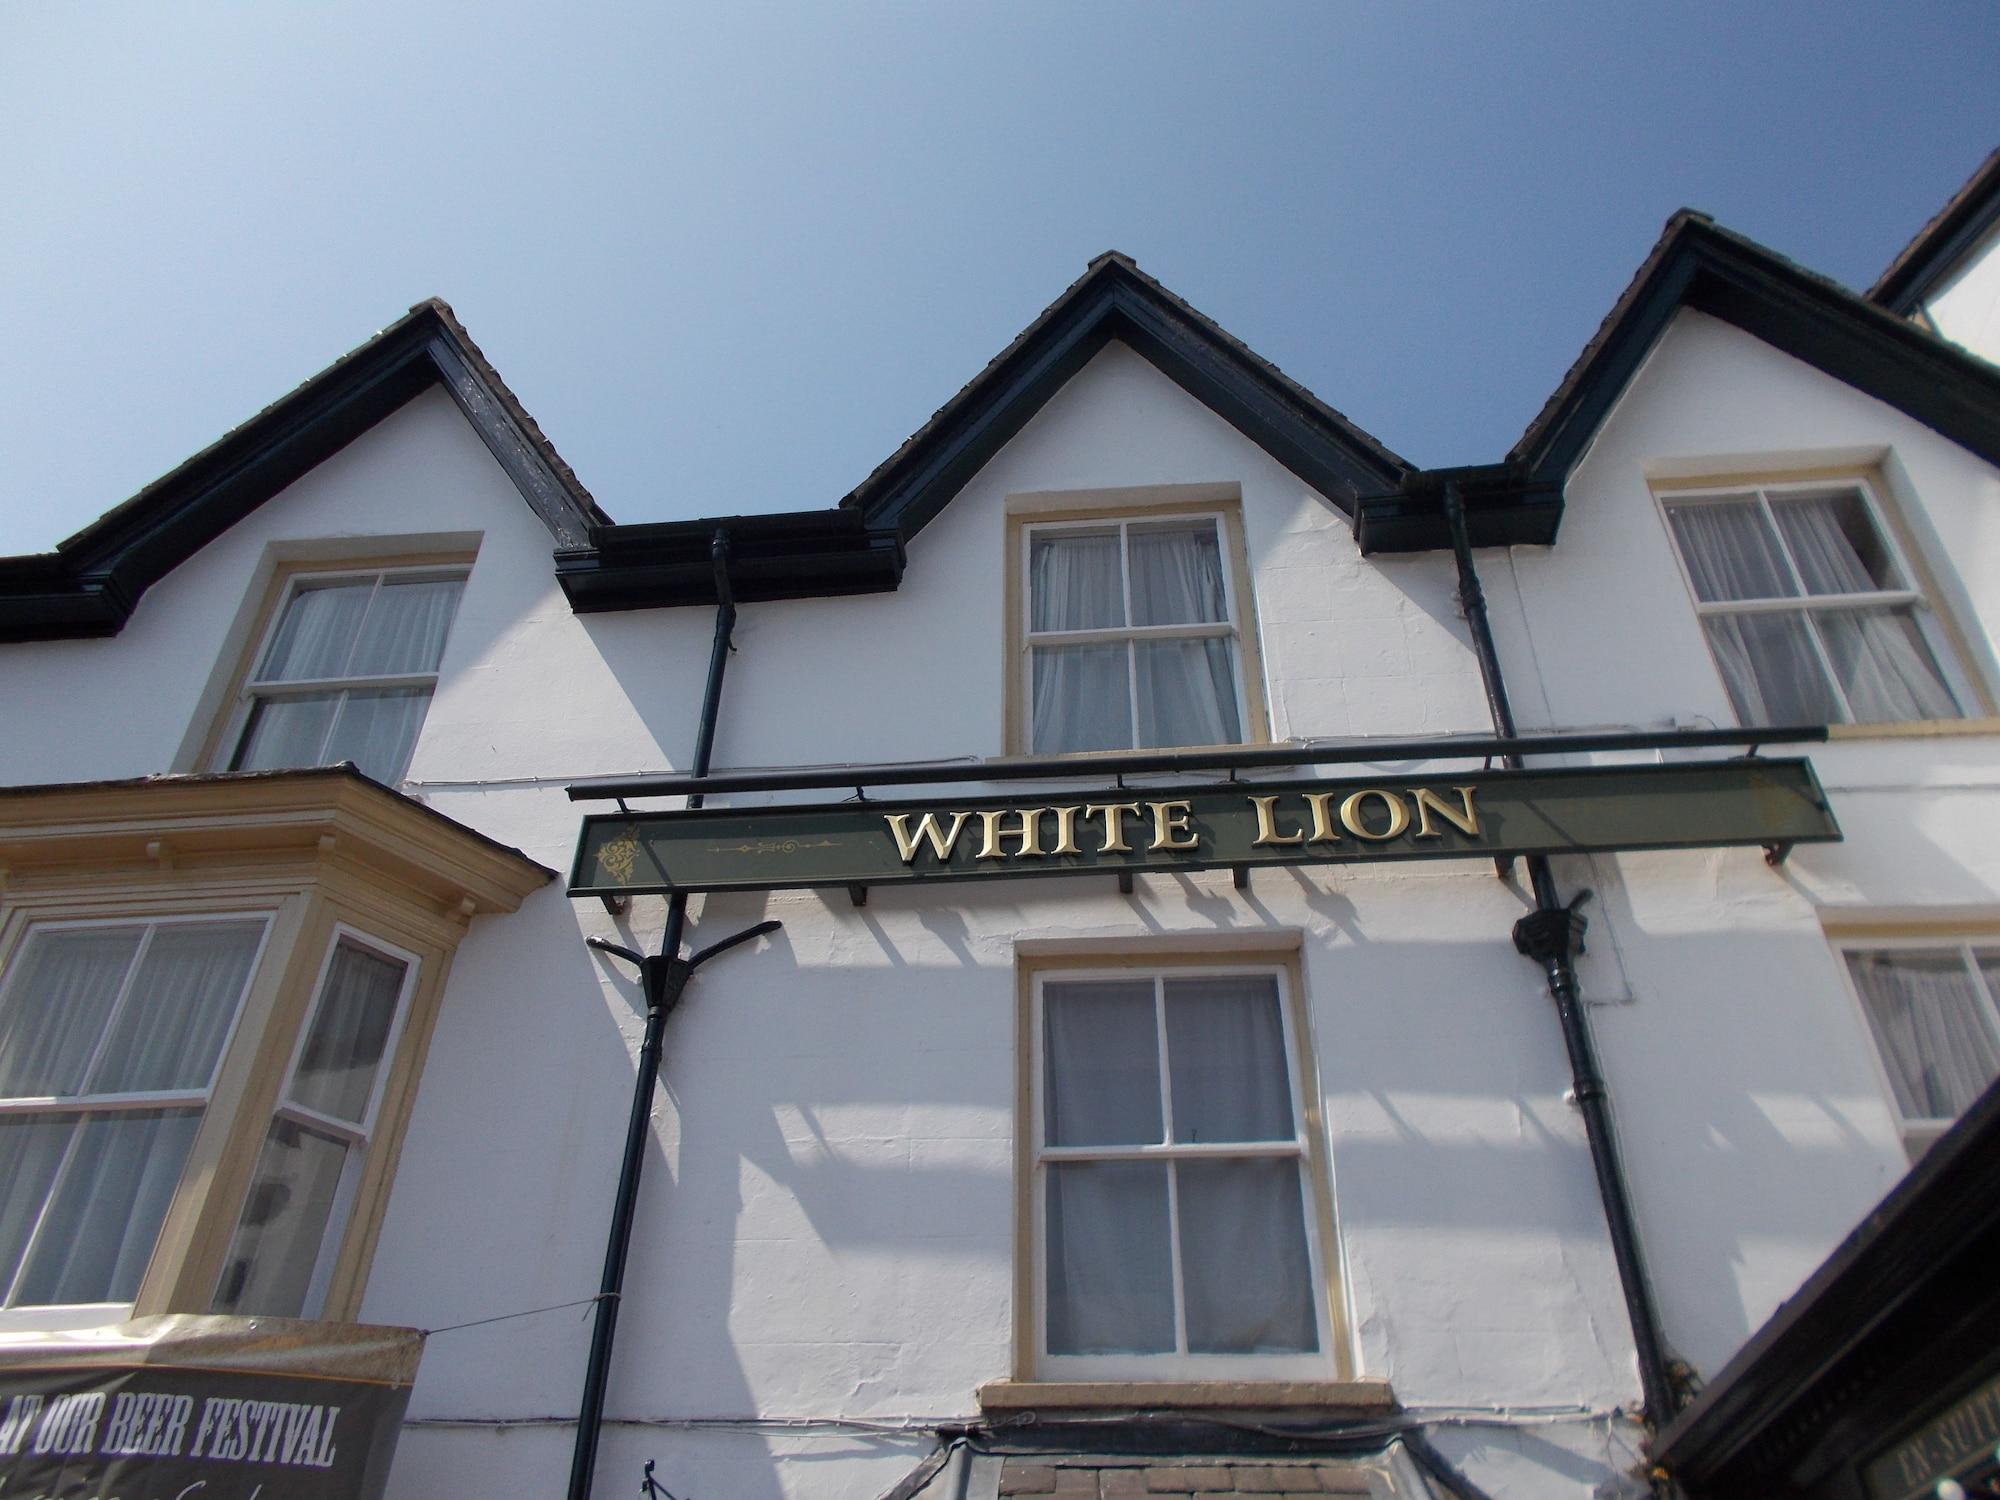 The White Lion Hotel image